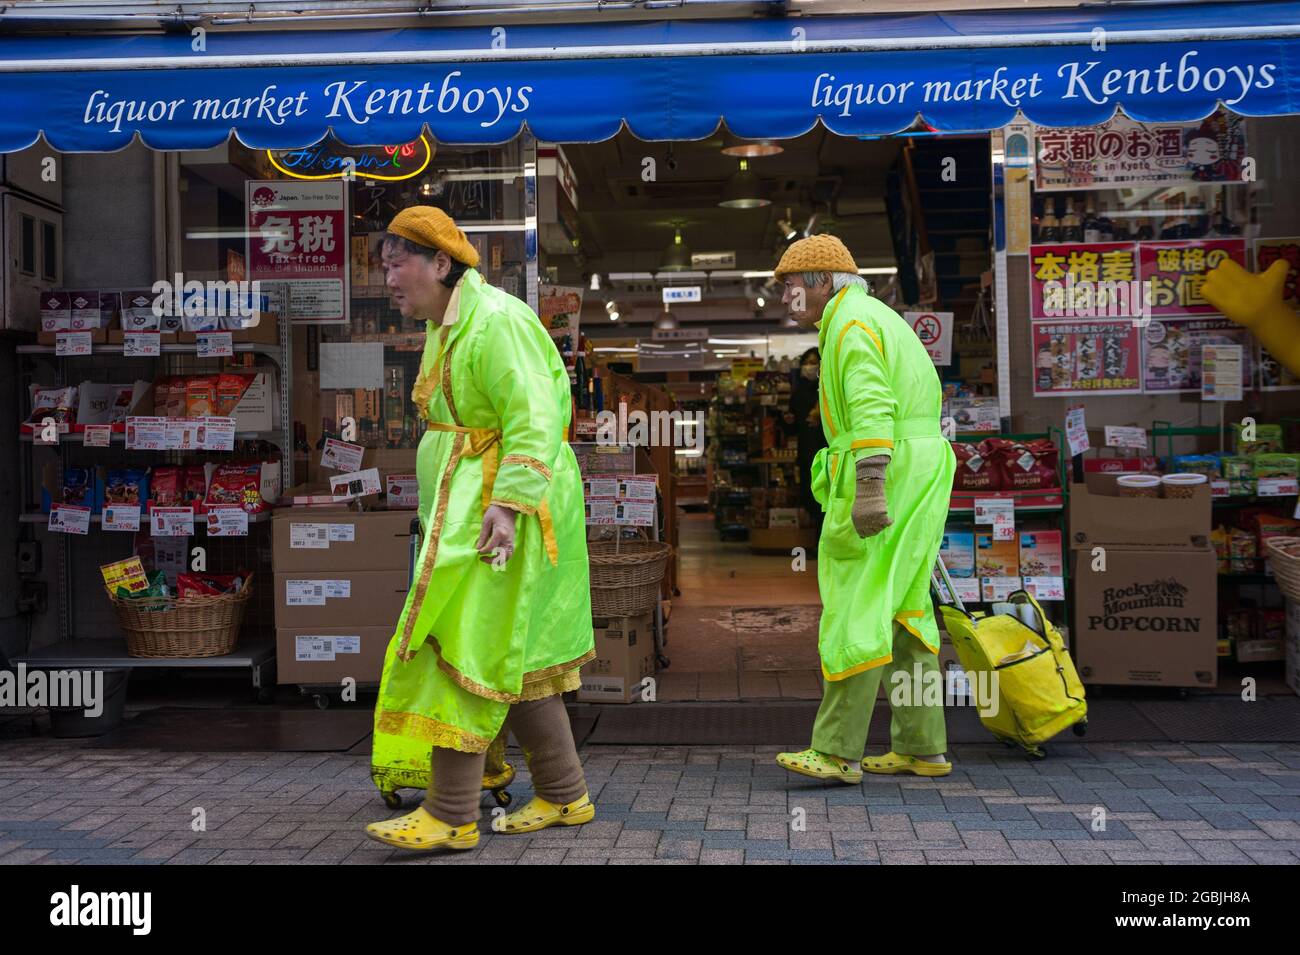 25.12.2017, Kyoto, Japan, Asia - An elderly couple wearing bright matching outfits in front of a liquor market in the city centre. Stock Photo